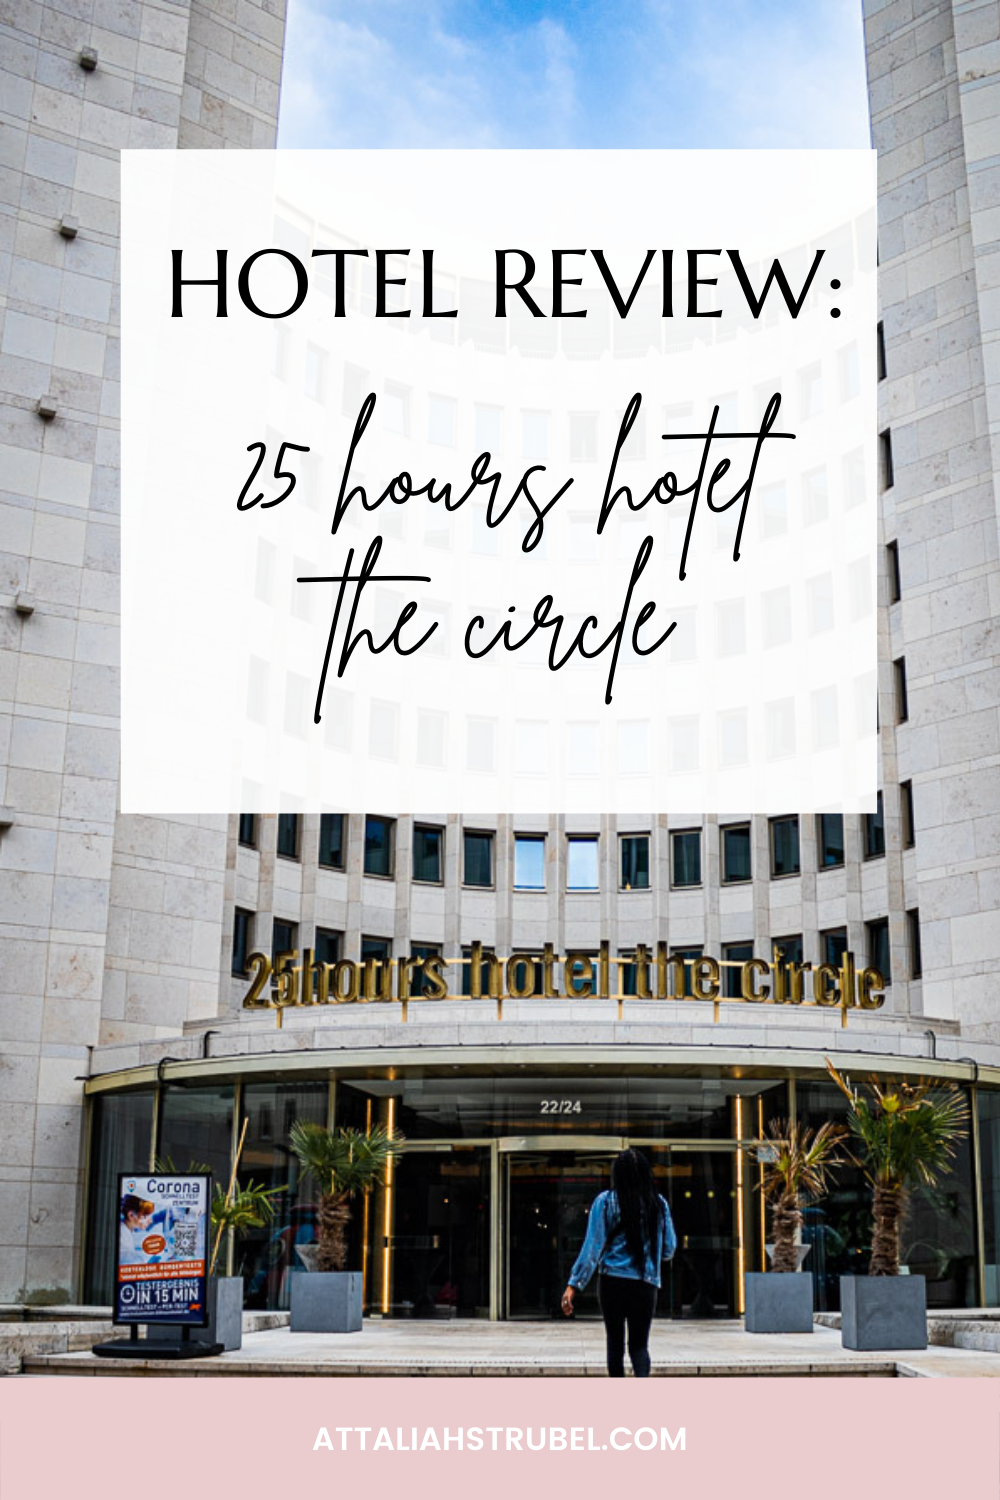 Hotel Review: 25 Hours Hotel Cologne The Circle